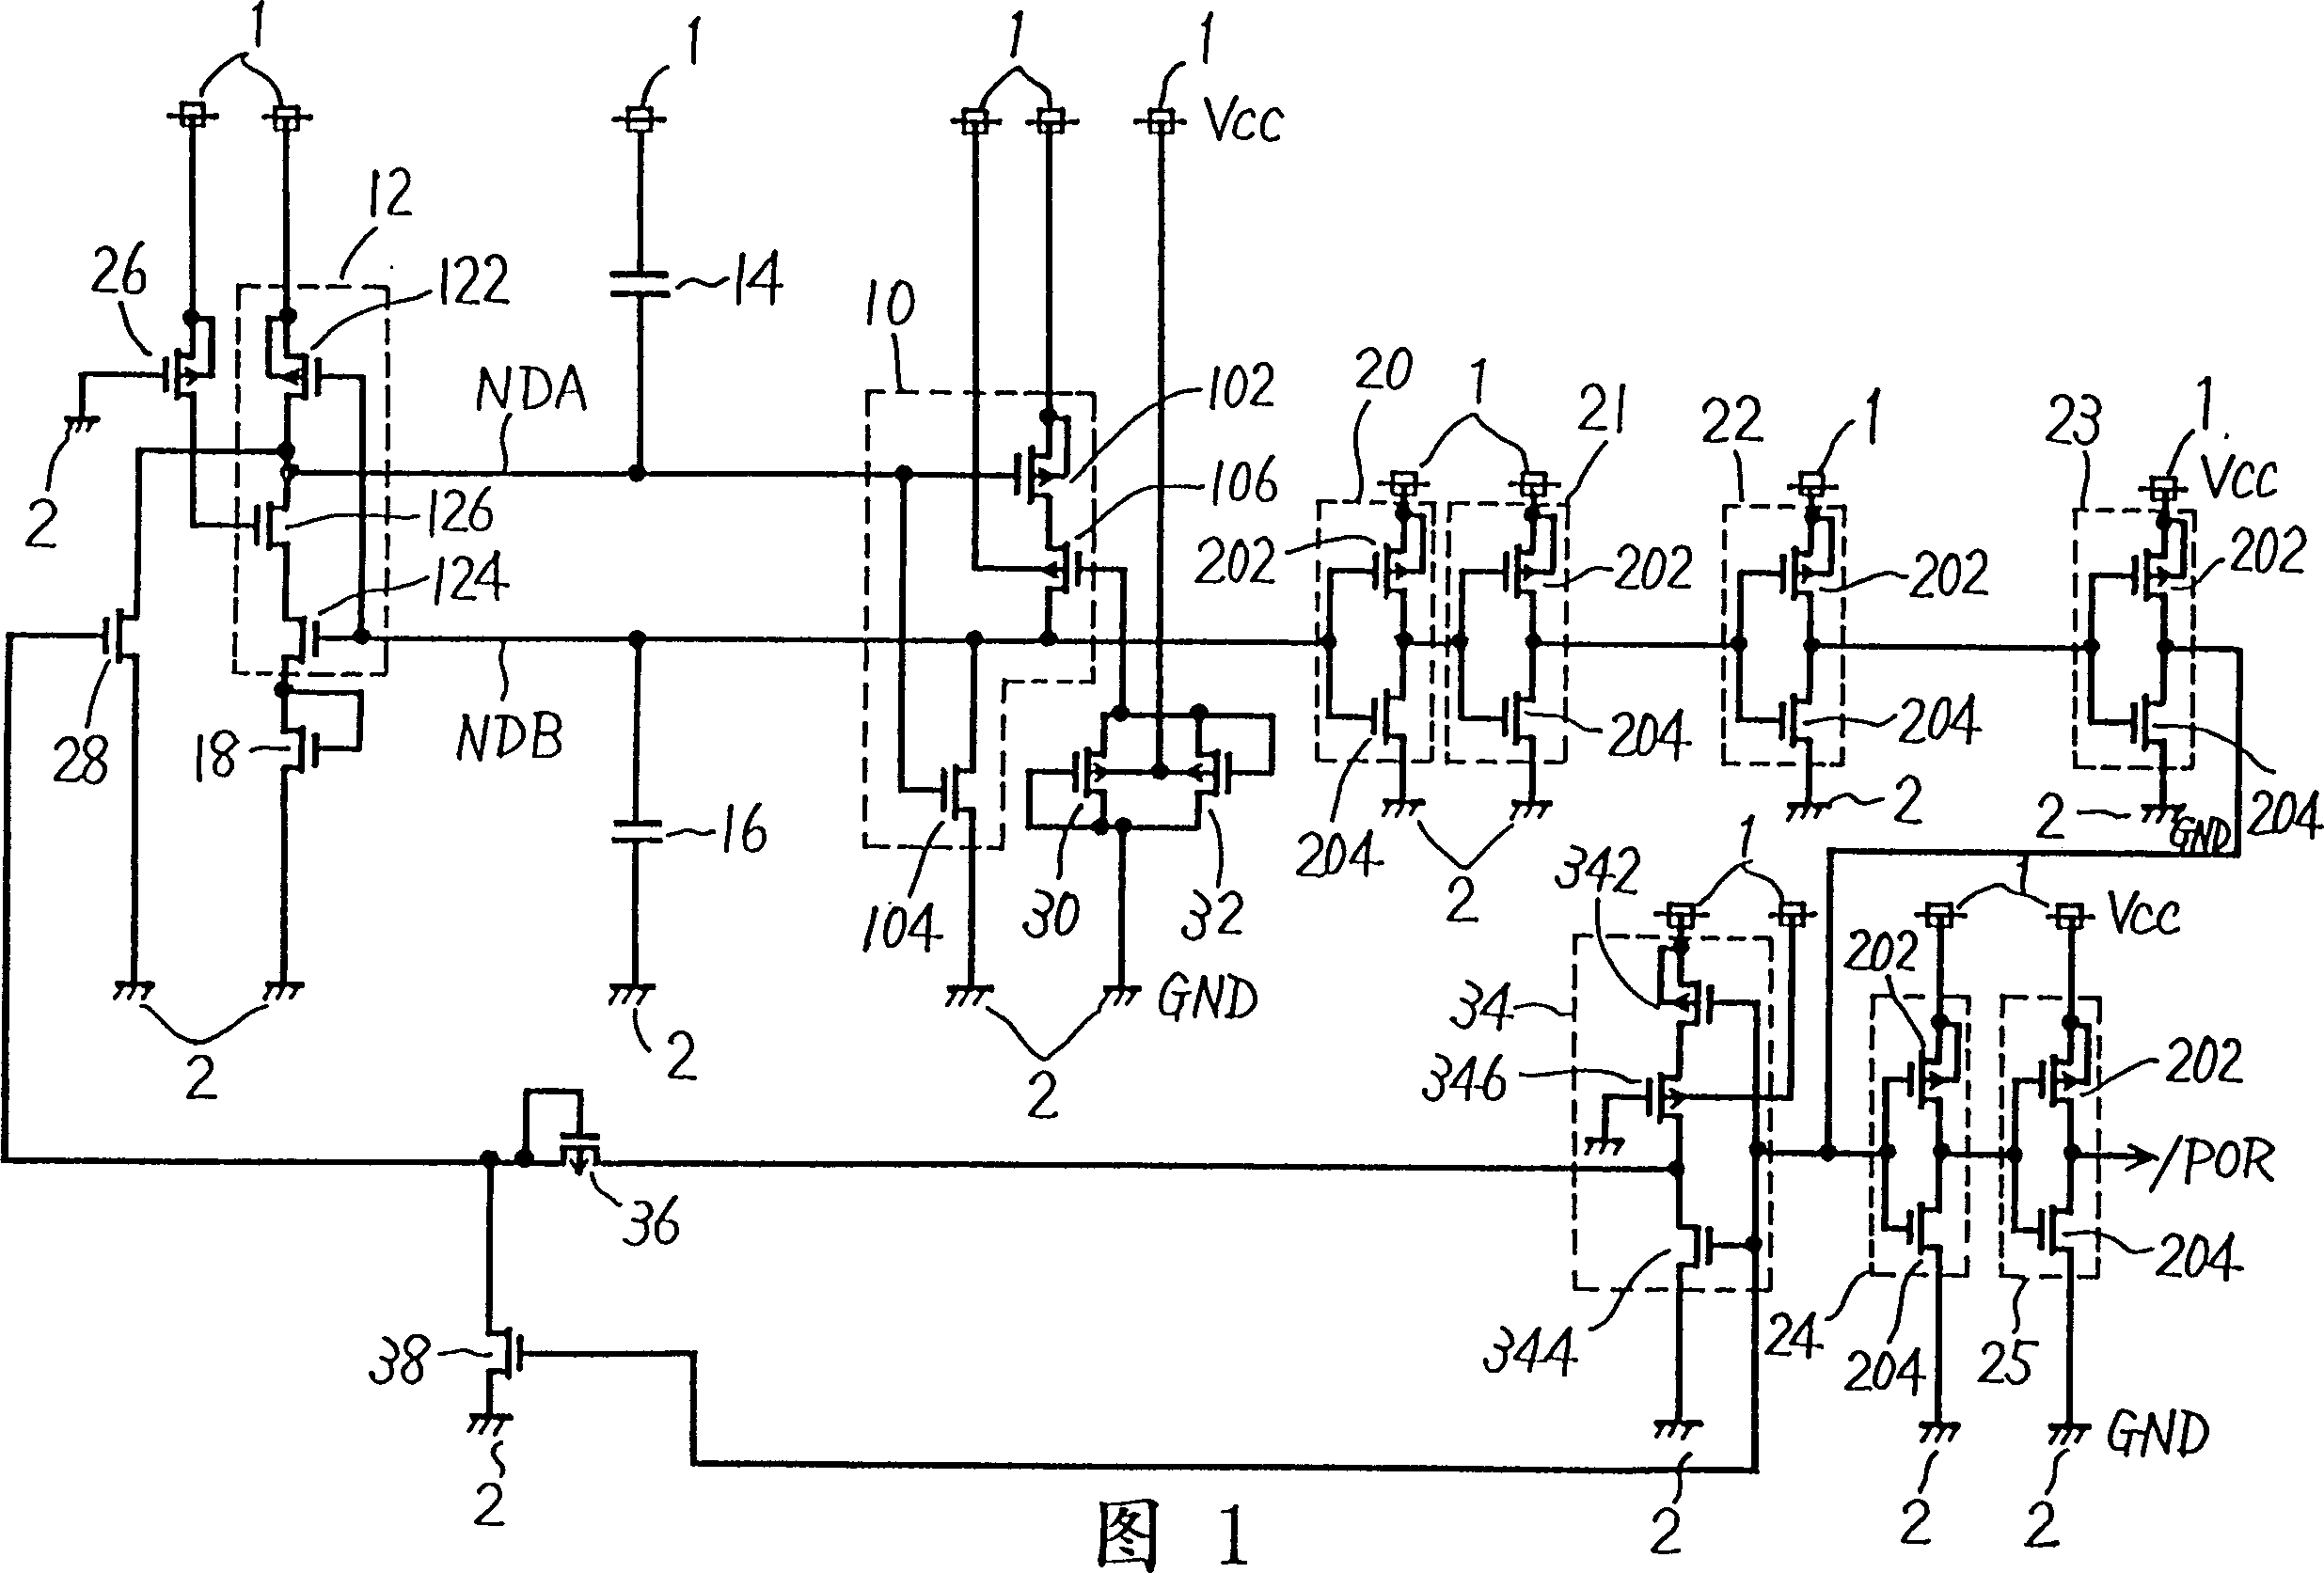 Power on reset circuit capable of generating power on reset signal without fail